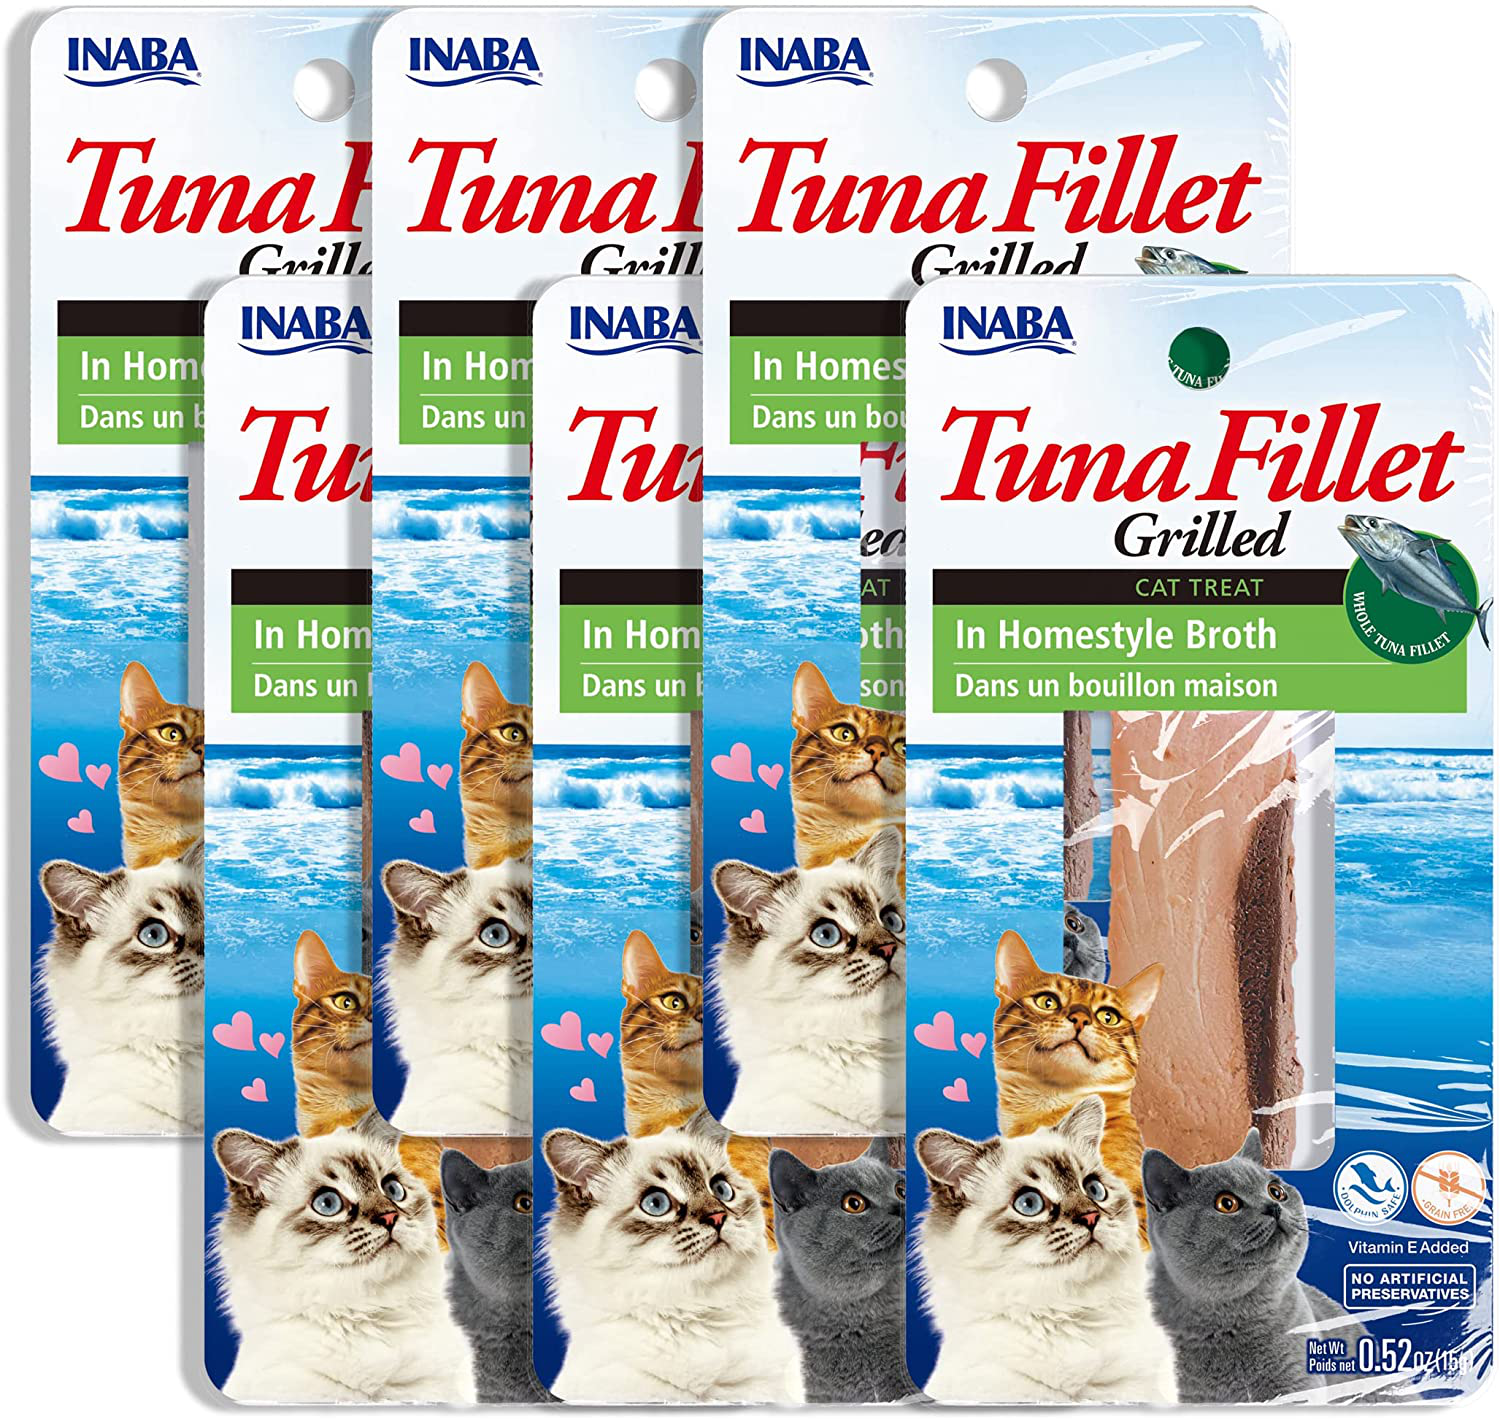 INABA Natural, Premium Hand-Cut Grilled Tuna Fillet Cat Treats/Topper/Complement with Vitamin E and Green Tea Extract, 0.52 Ounces Each, Pack of 6, Homestyle Broth